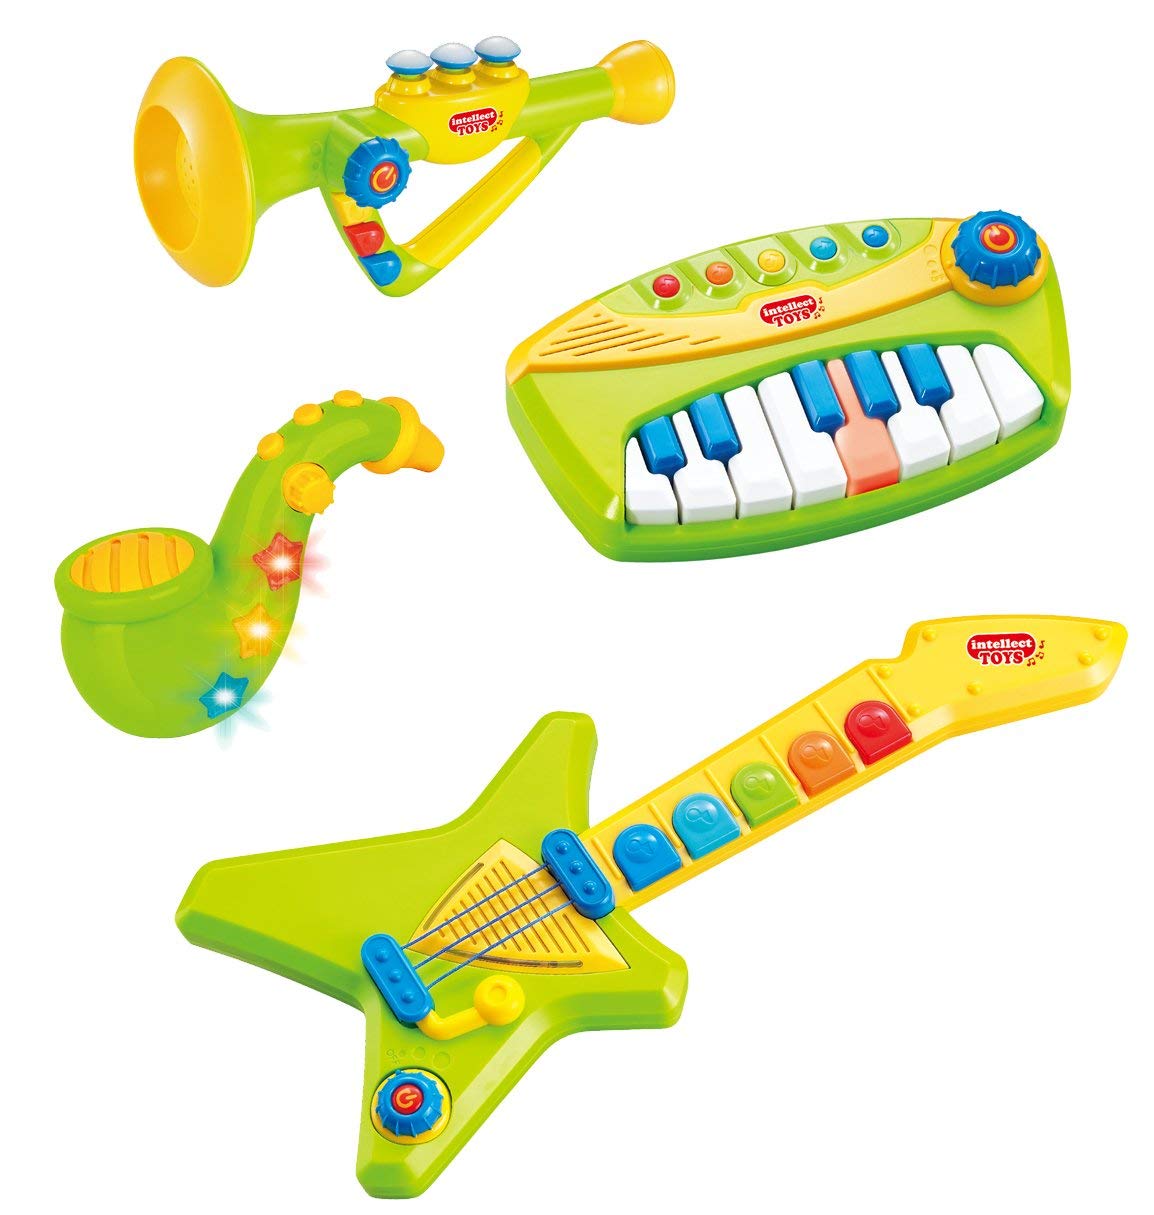 Liberty Imports 4-Piece Band Musical Toy Instruments Playset